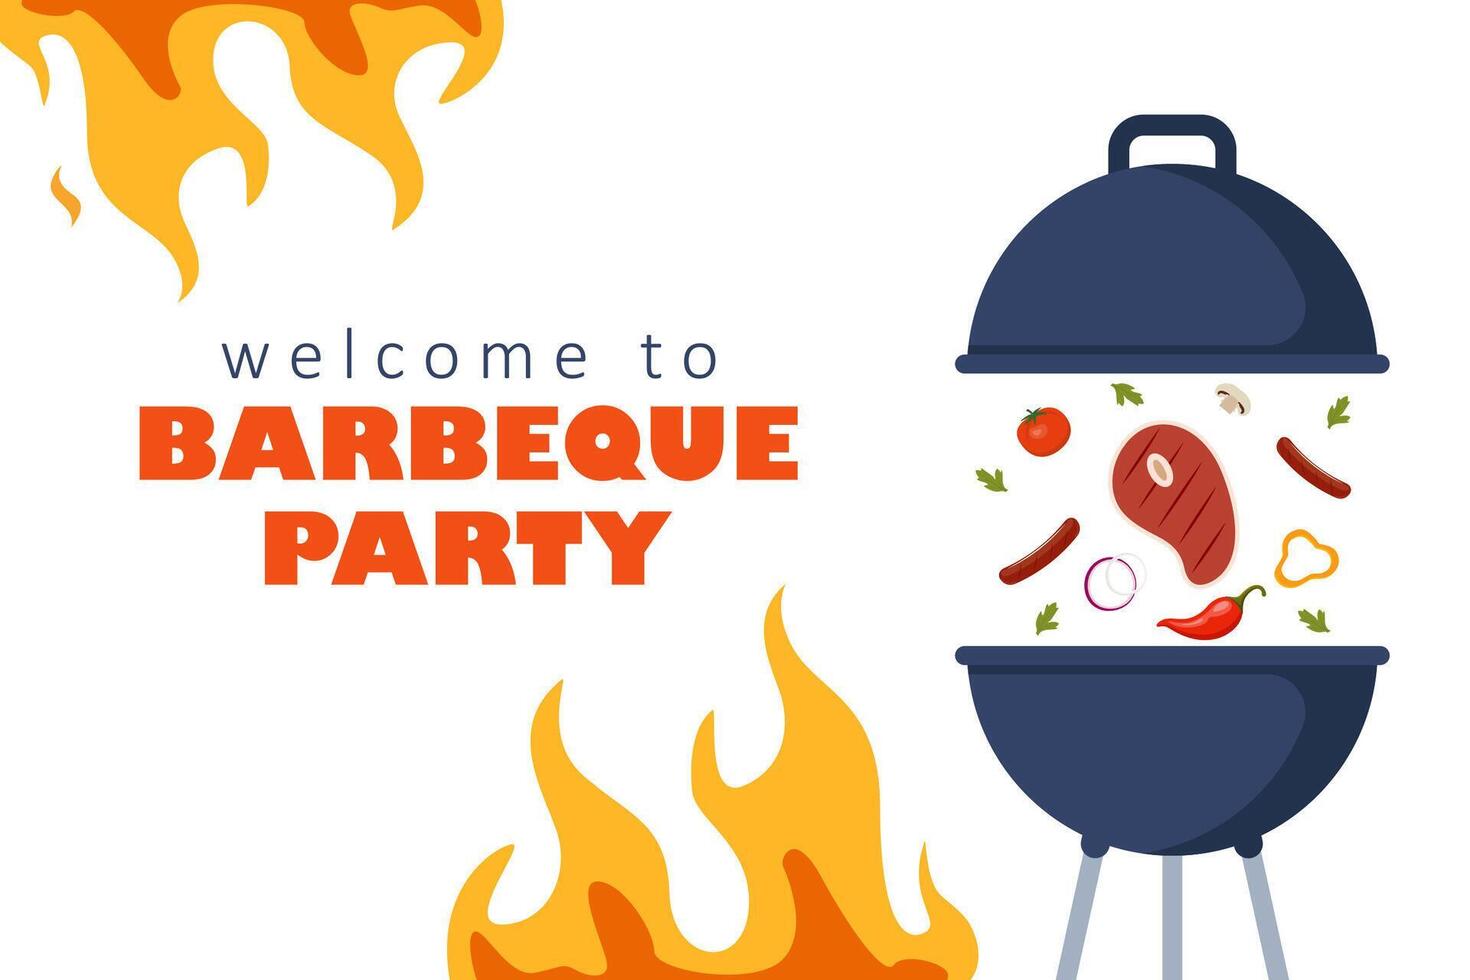 Barbeque party invitation card or poster template with grill food flyer. Vector illustration.